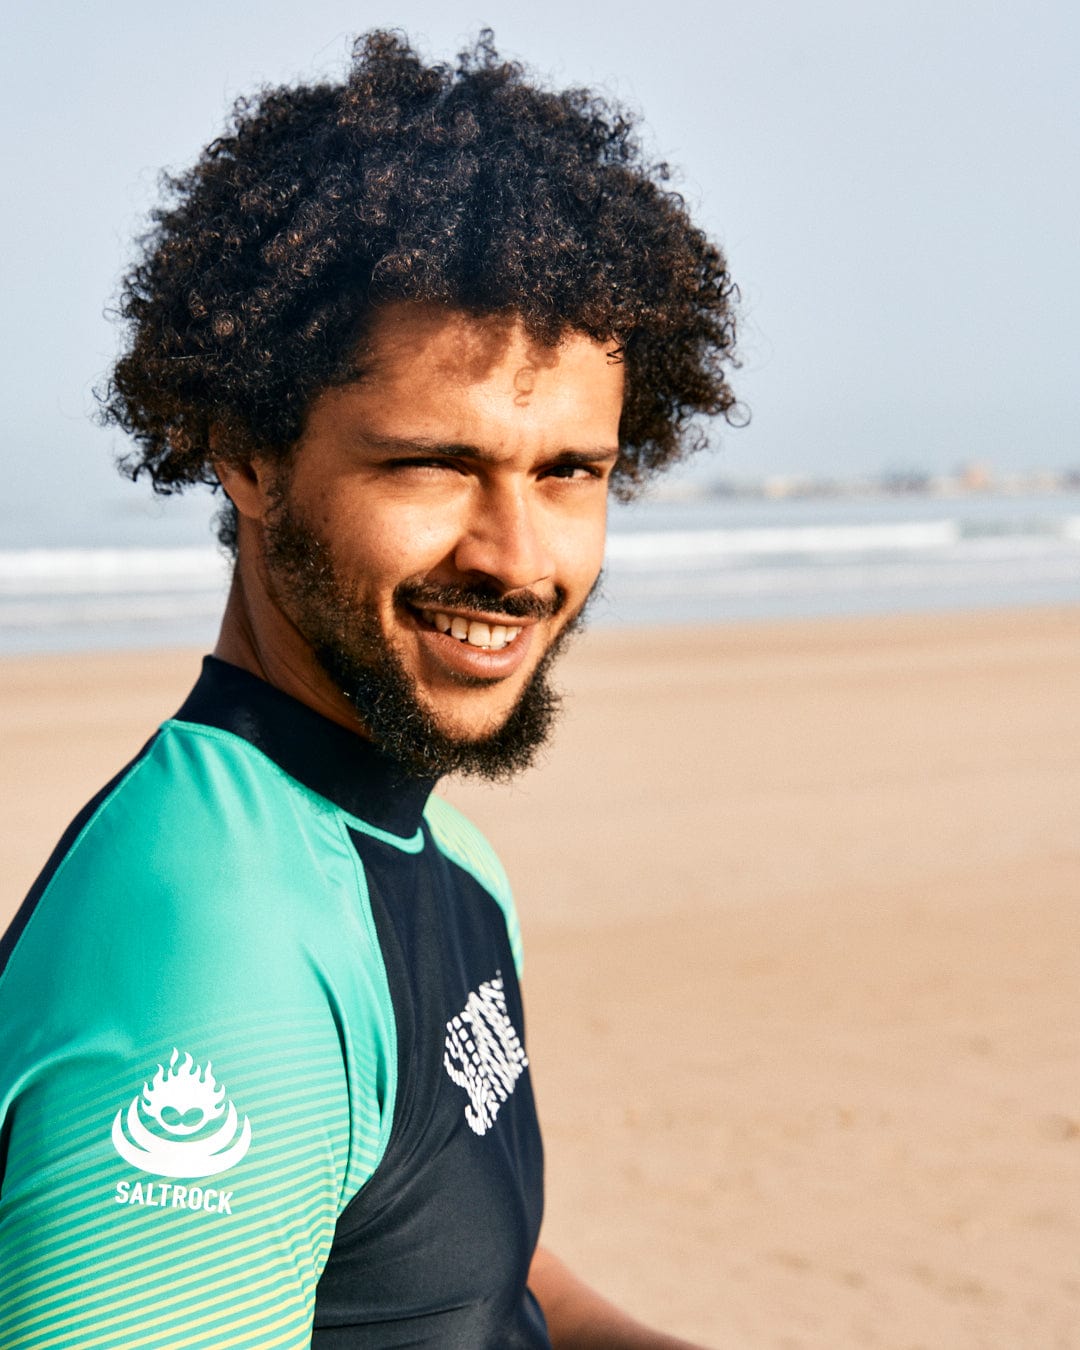 A man with curly hair wearing a green Saltrock DNA Wave Rashvest featuring UPF 50 protection smiles at the beach, with the ocean and sand visible in the background.